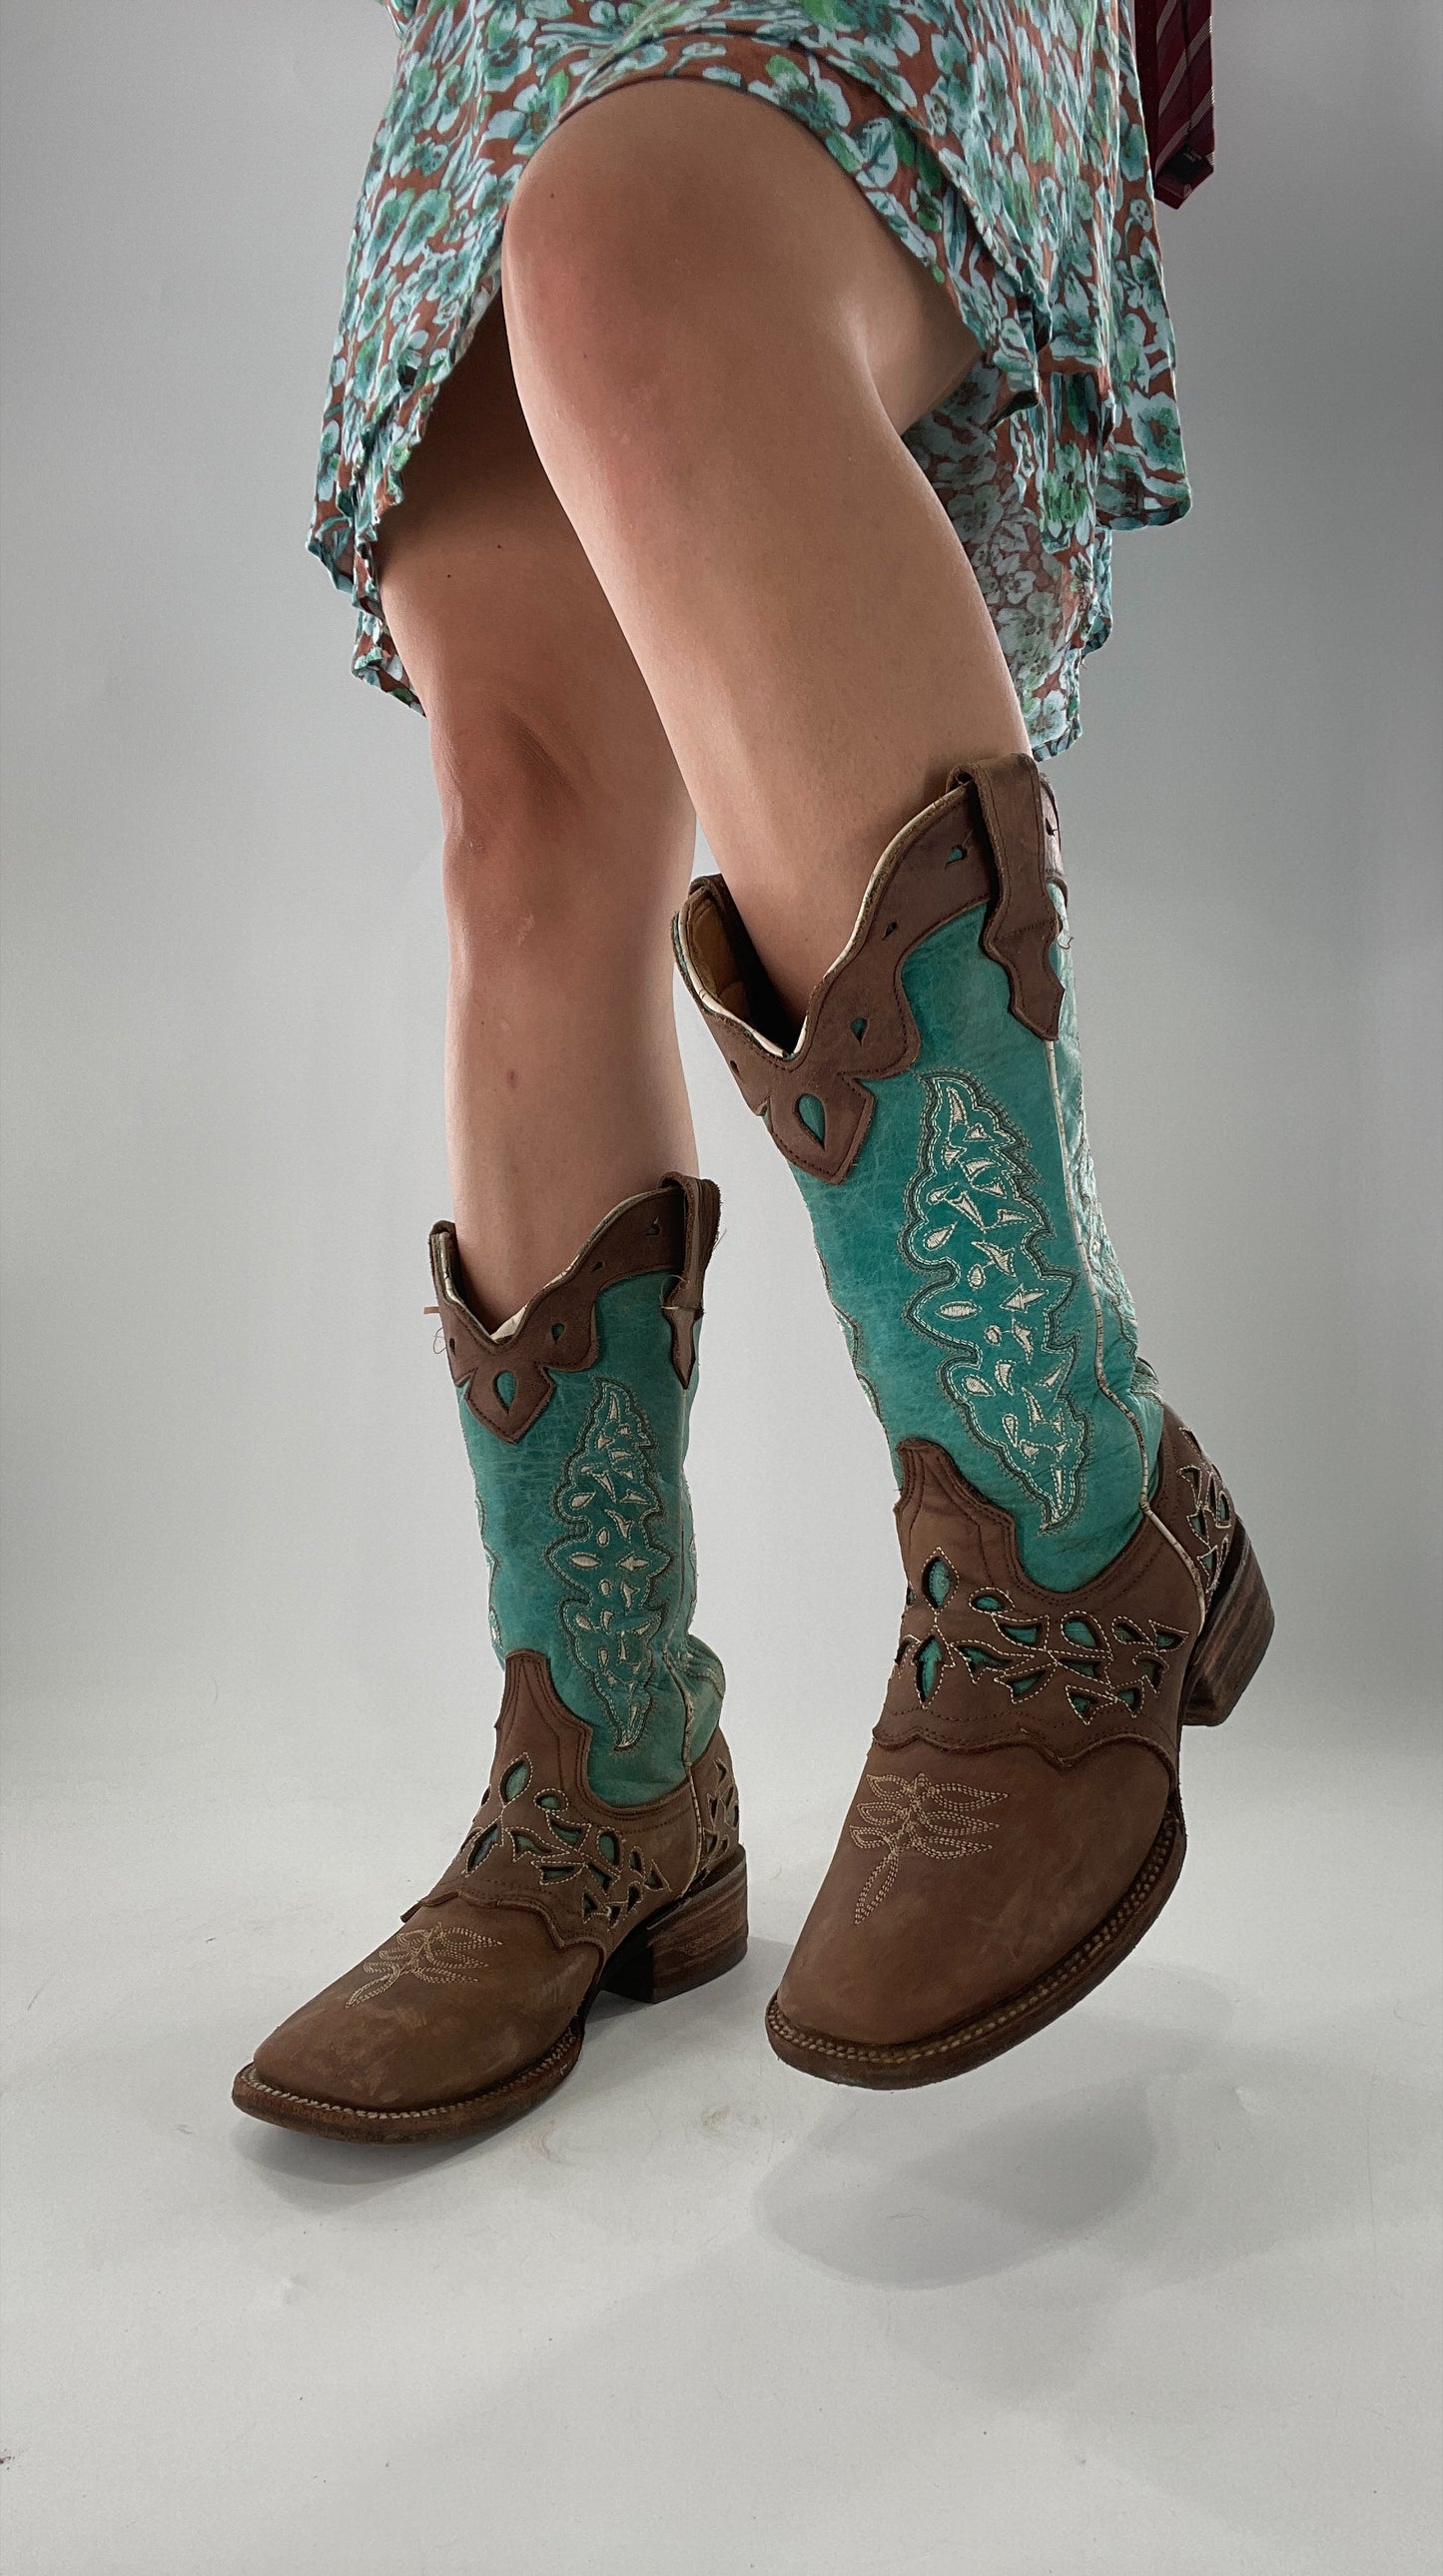 Porto Rebelde Turquoise Blue and Brown Leather Lazer Cut Embroidered Boots (6.5)